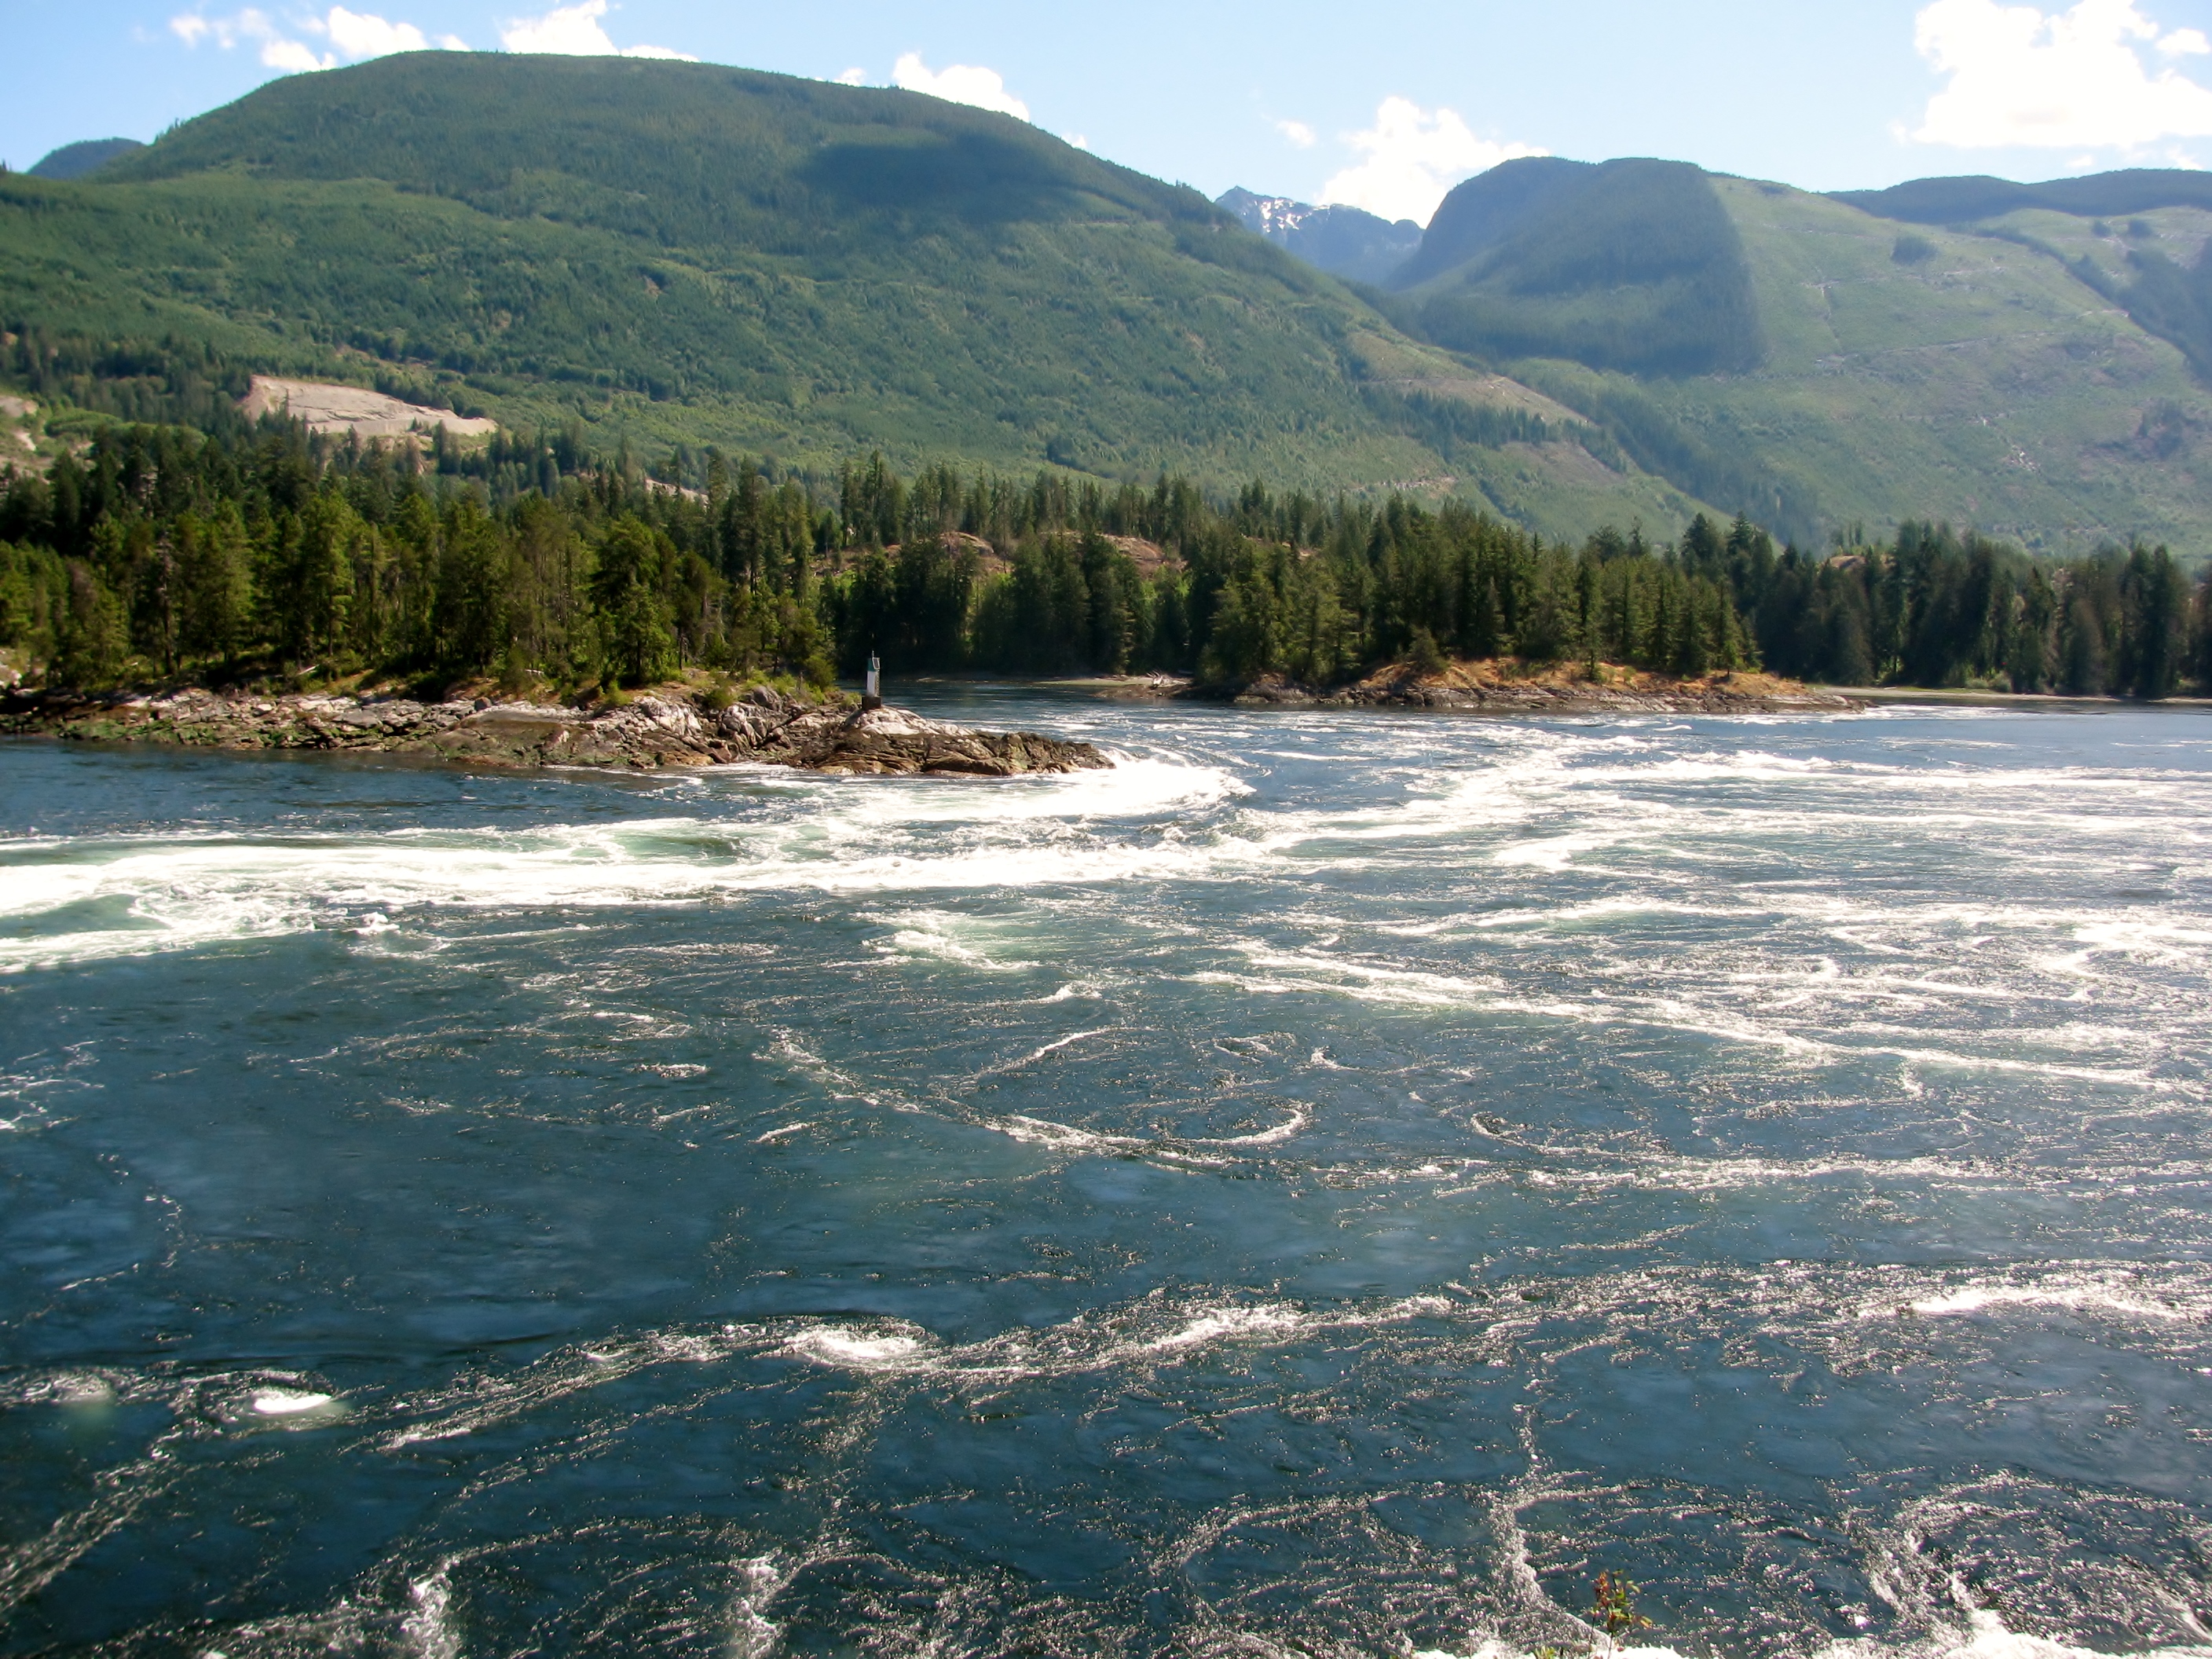 Rapids churn in a wide channel with green hills in the background.